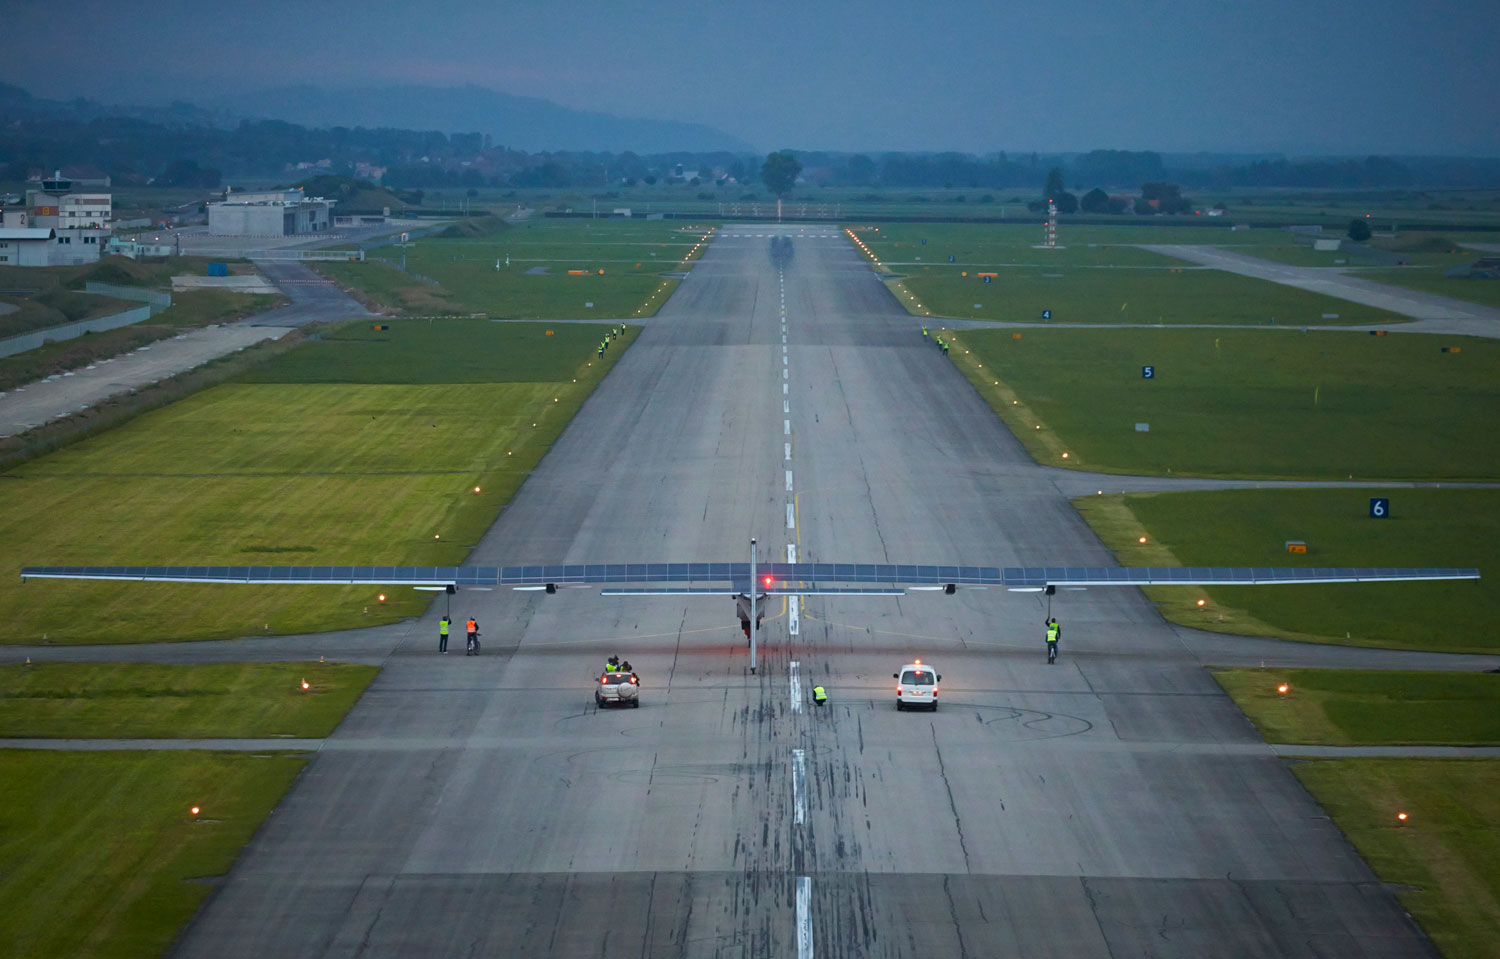 German test pilot Markus Scherdel prepares for take-off in the solar-powered Solar Impulse 2 aircraft on its maiden flight at its base in Payerne June 2, 2014.